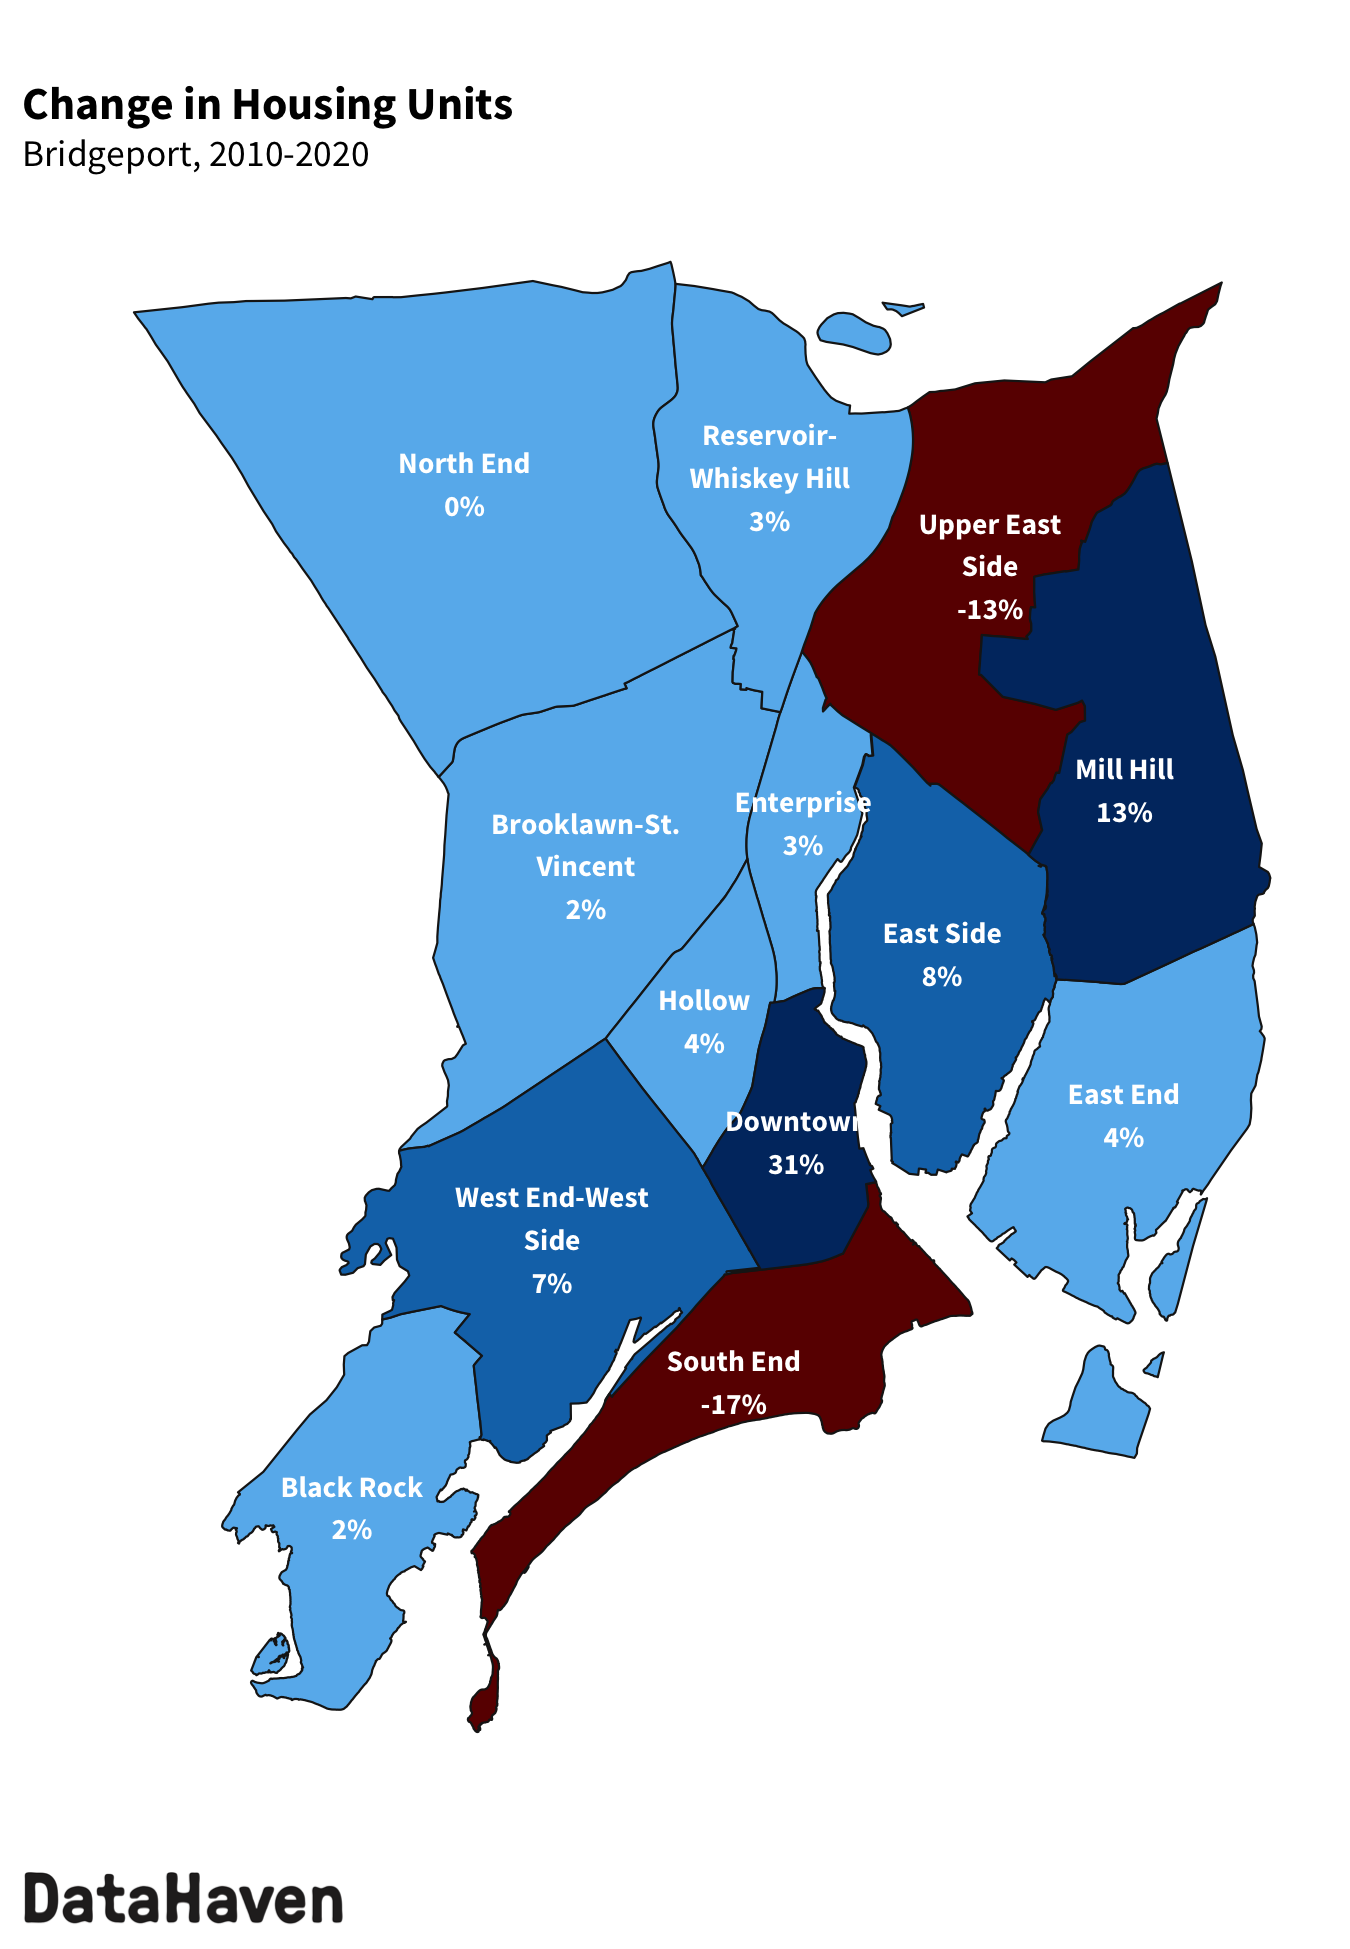 Bridgeport change in housing units from 2010 to 2020 Census